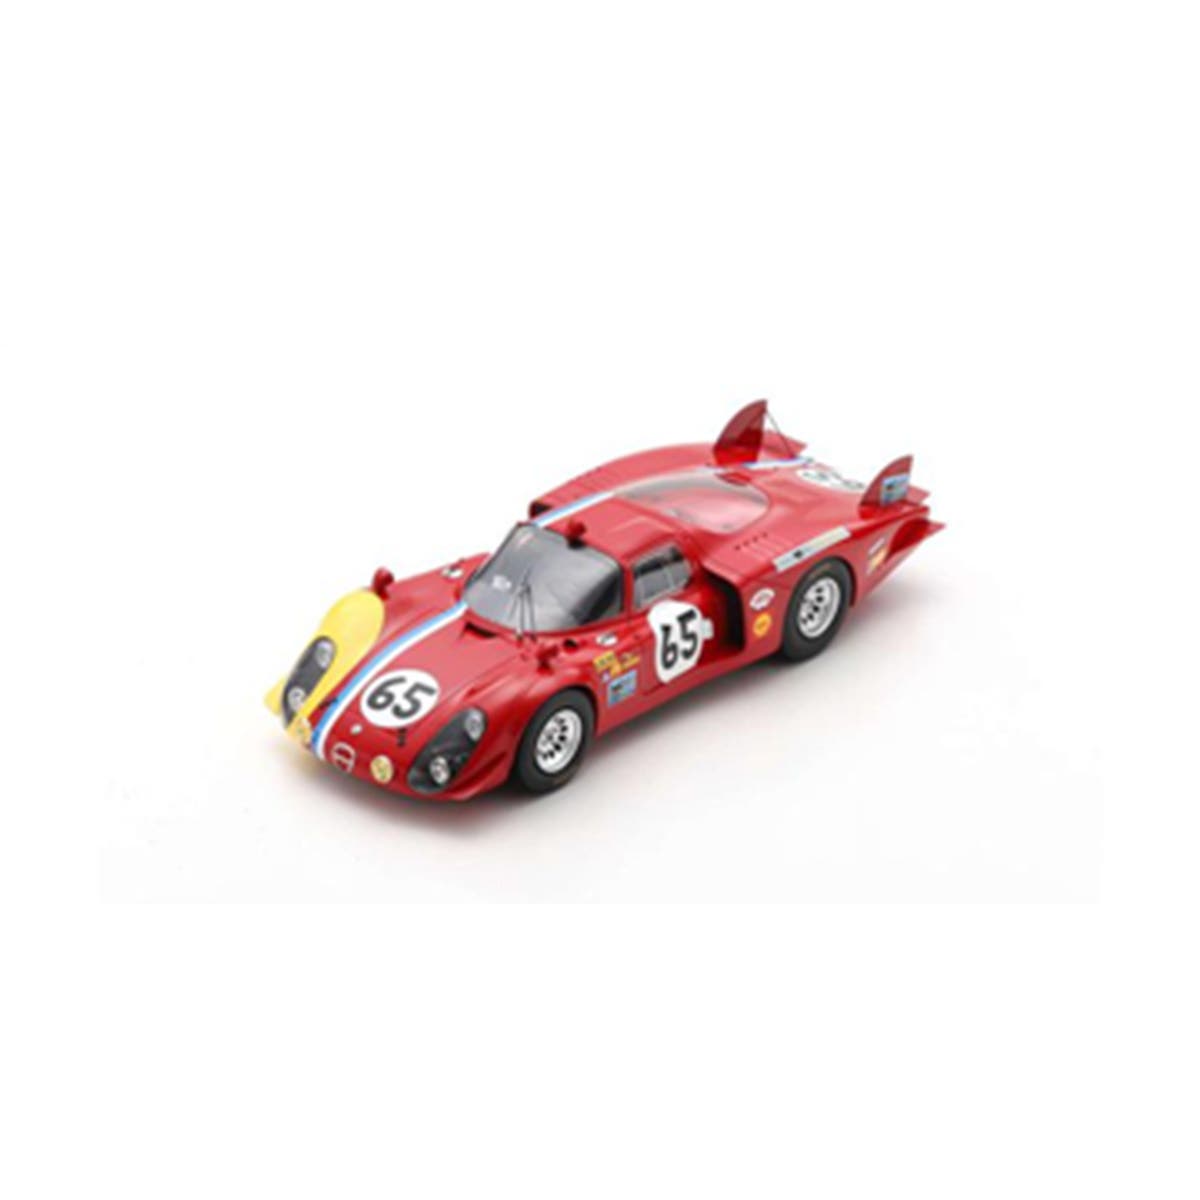 Alfa Romeo 33/2 No.65 24H Le Mans 1968 - S. Trosch - K. von Wendt - With Acrylic Cover - 1:18 Scale Resin Model Car